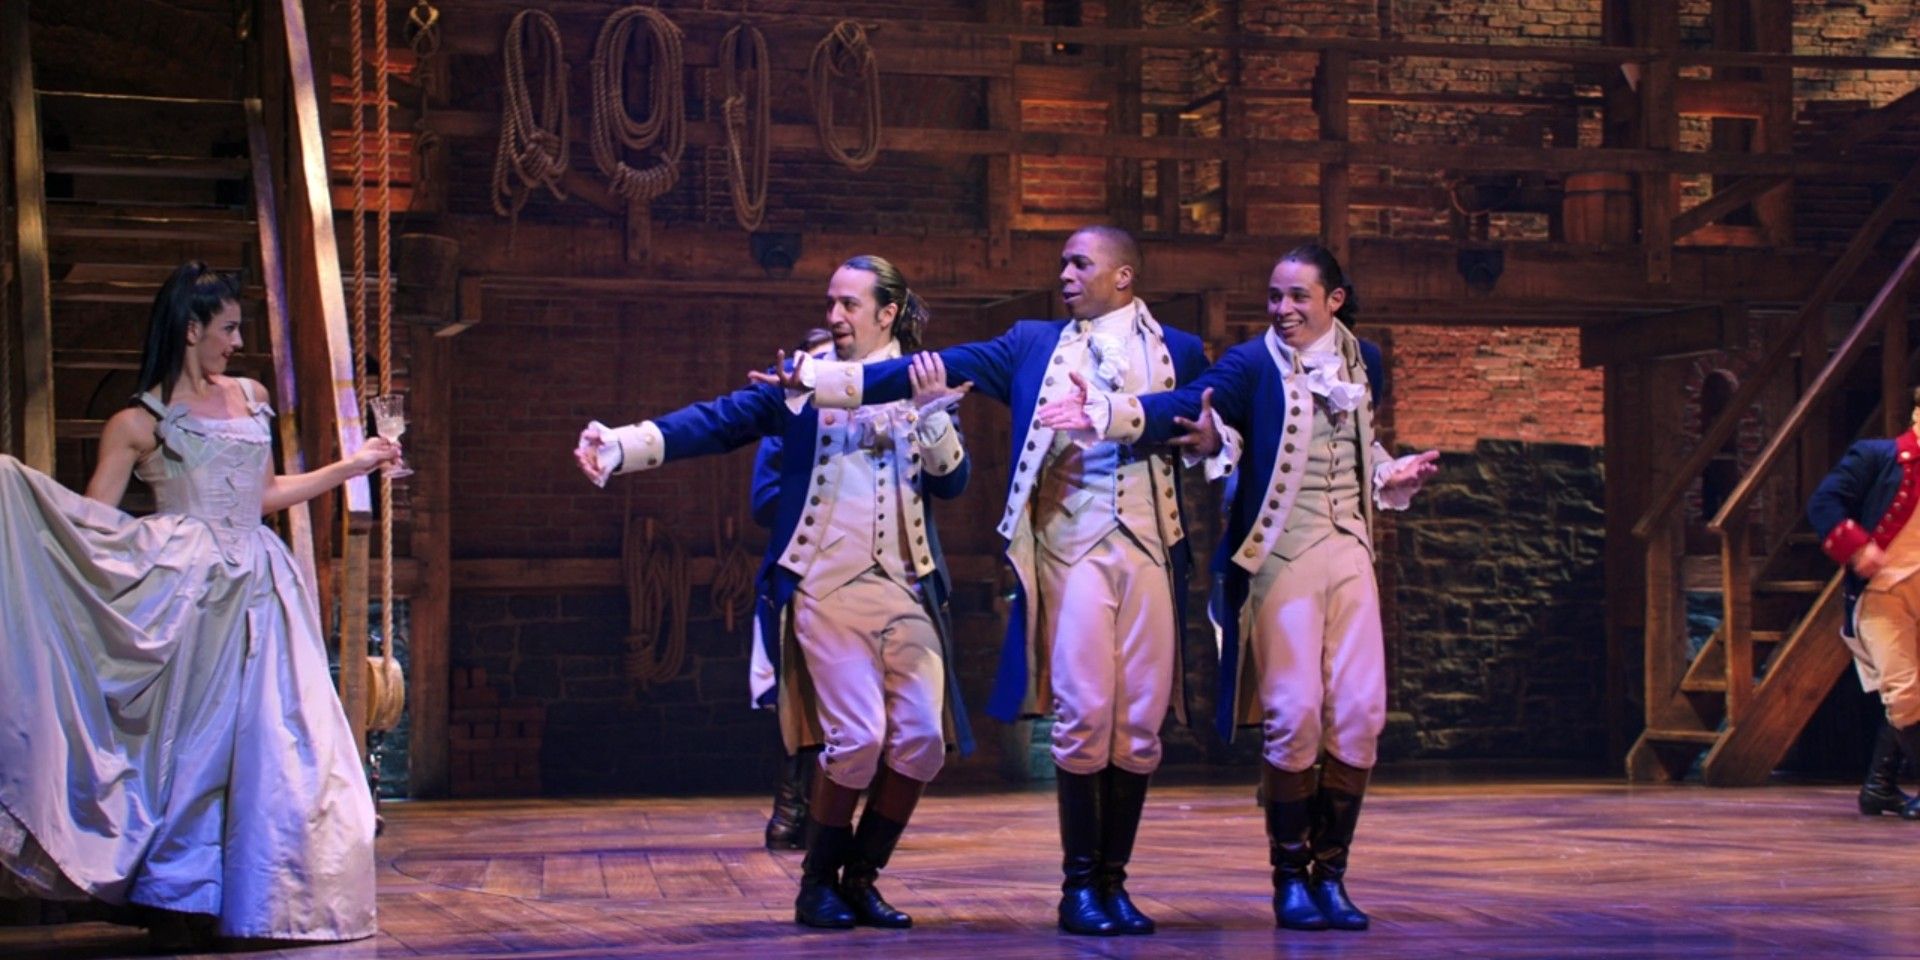 Alexander Hamilton and his friends gesture to a woman coming down the stairs in Hamilton